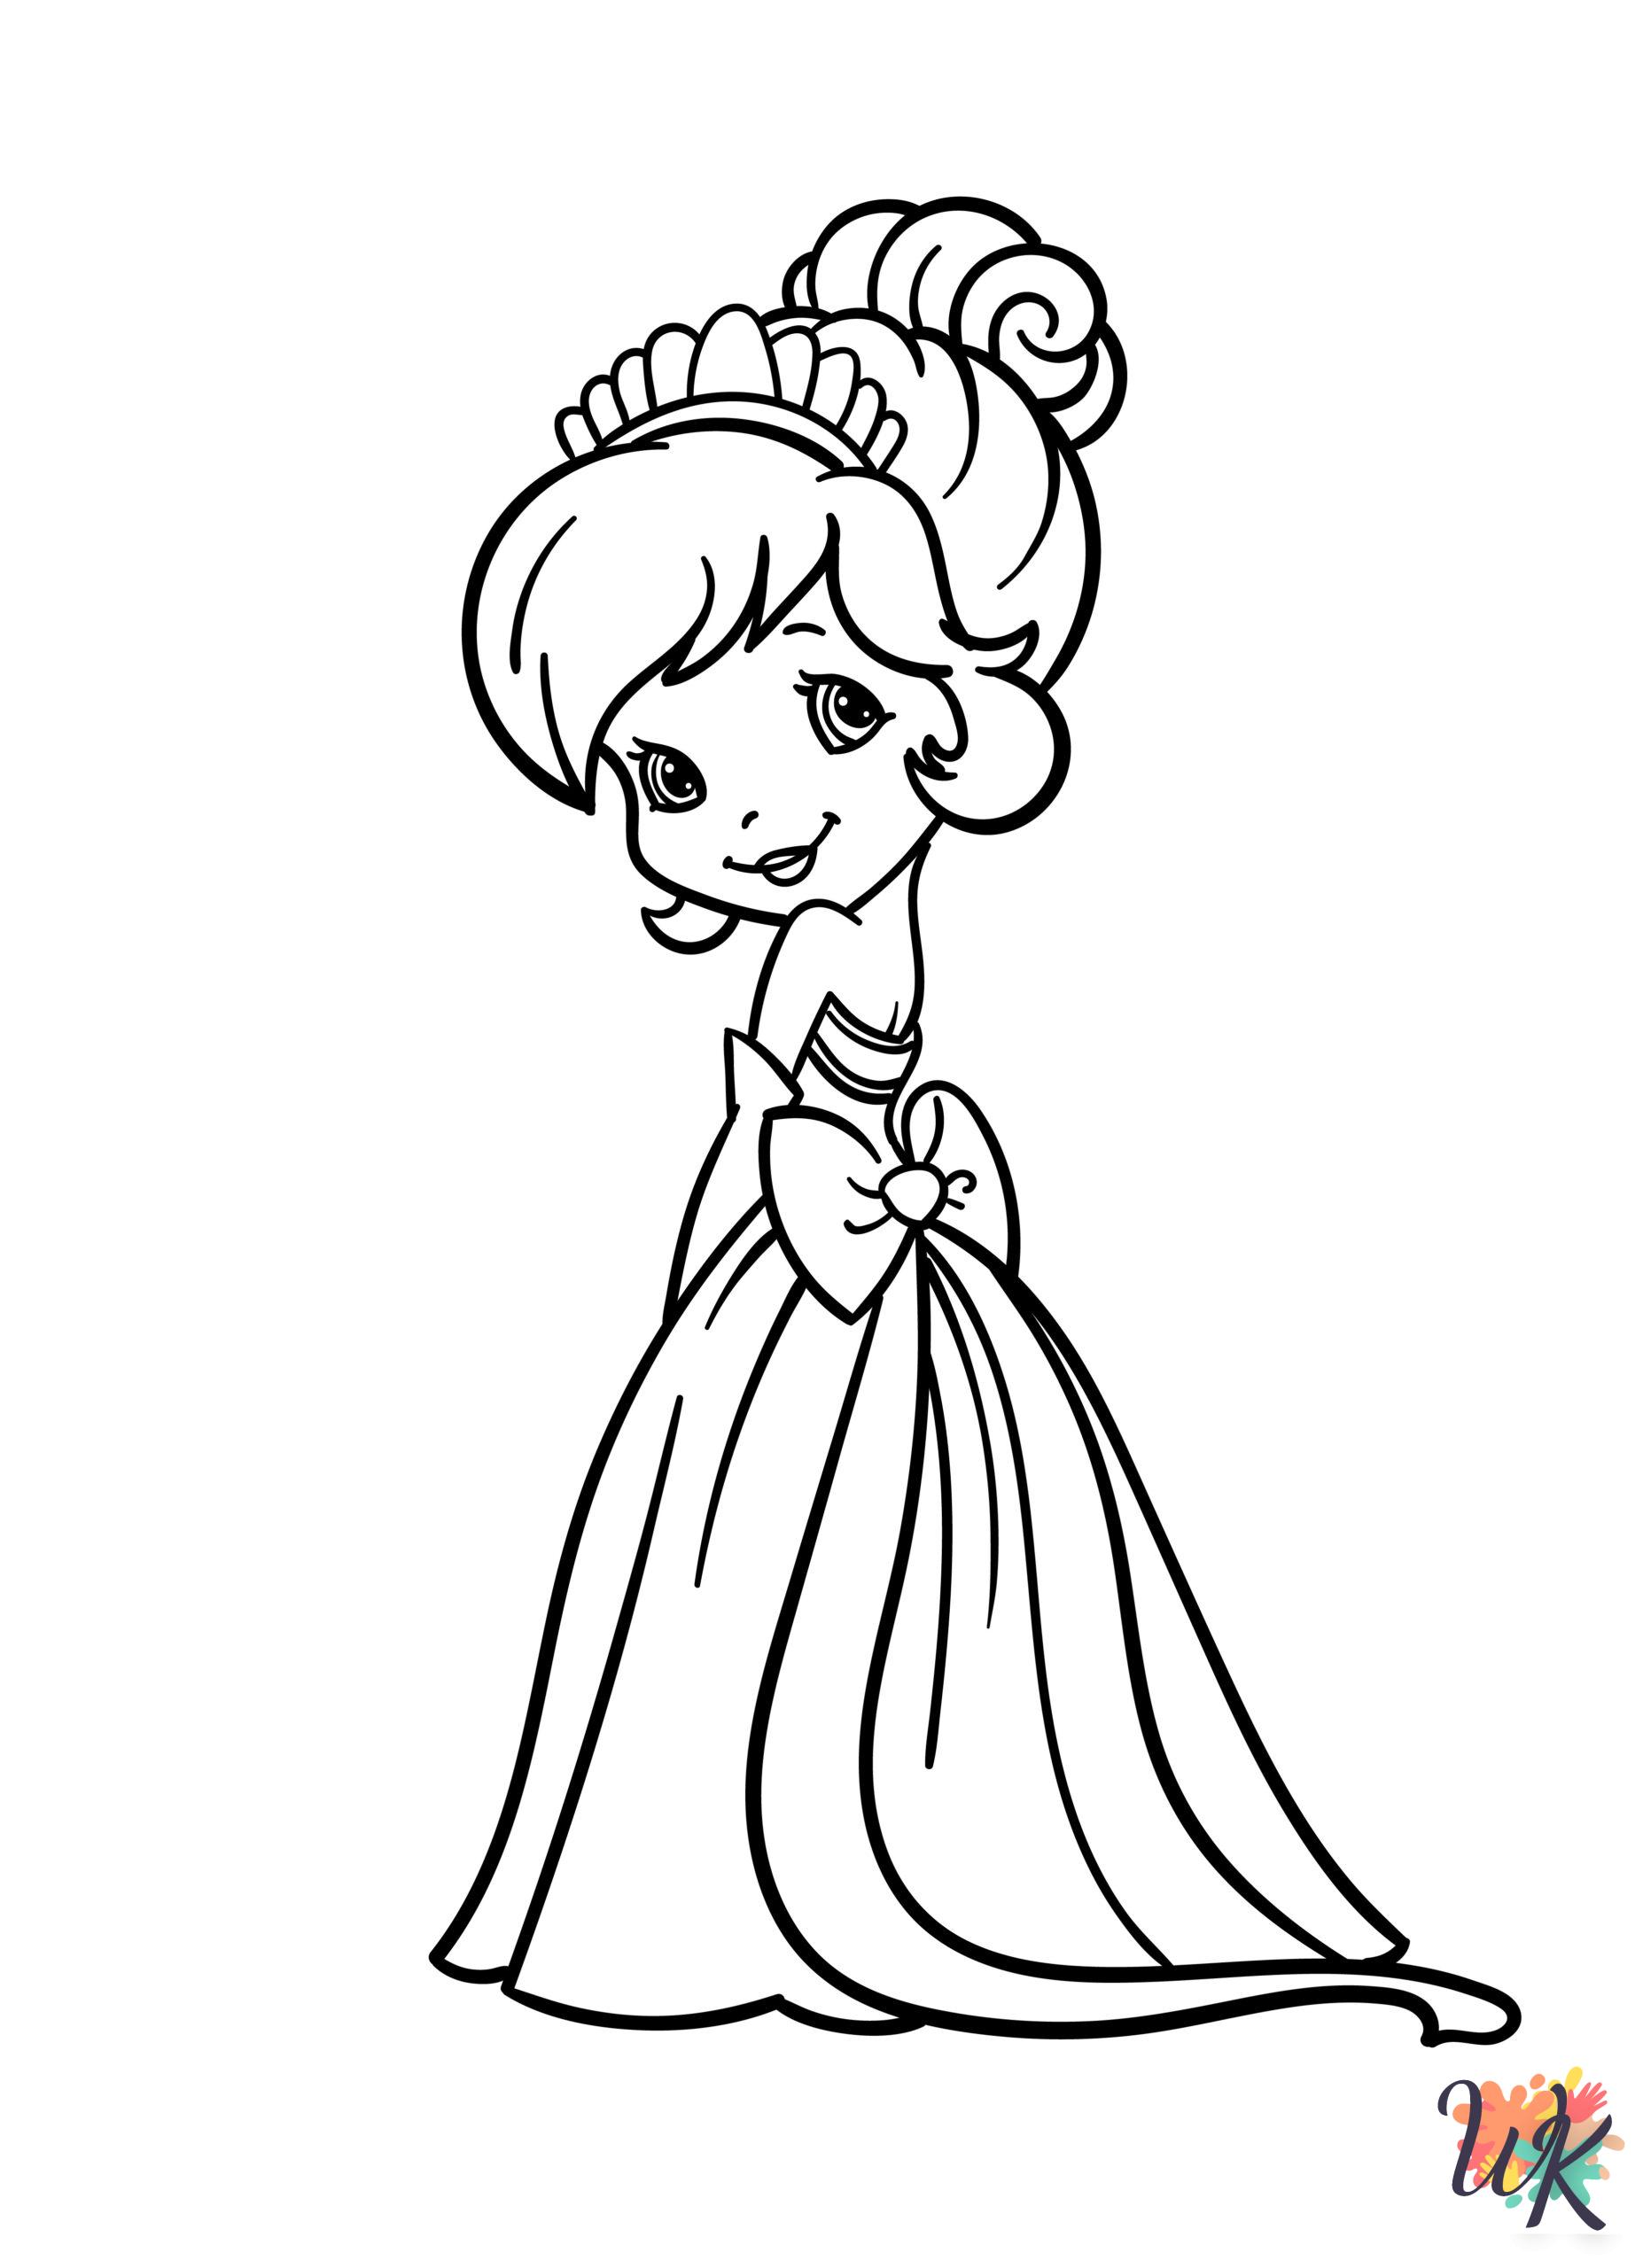 Strawberry Shortcake coloring book pages